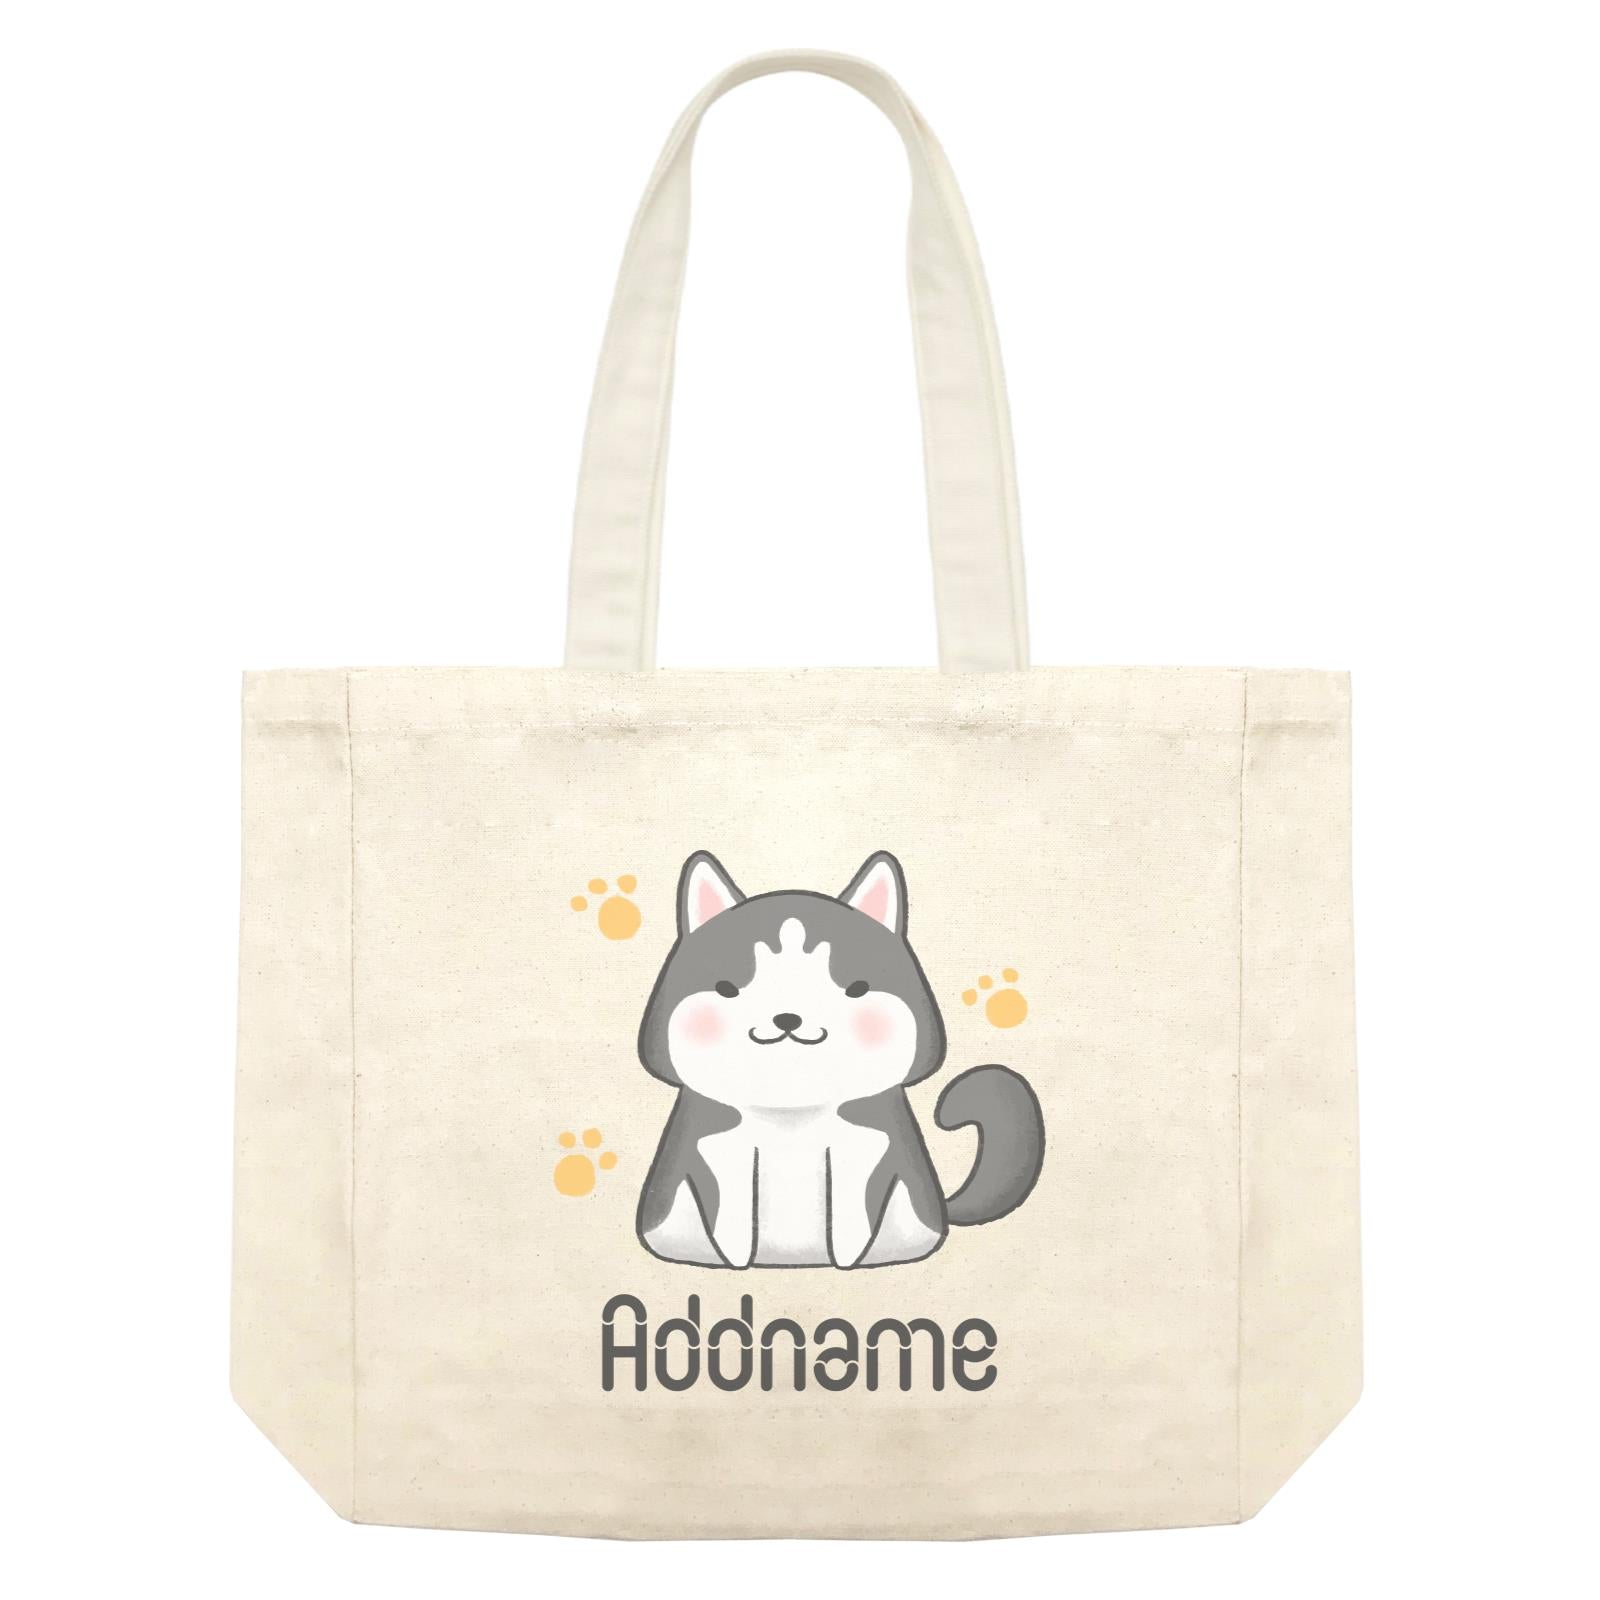 Cute Hand Drawn Style Husky Addname Shopping Bag